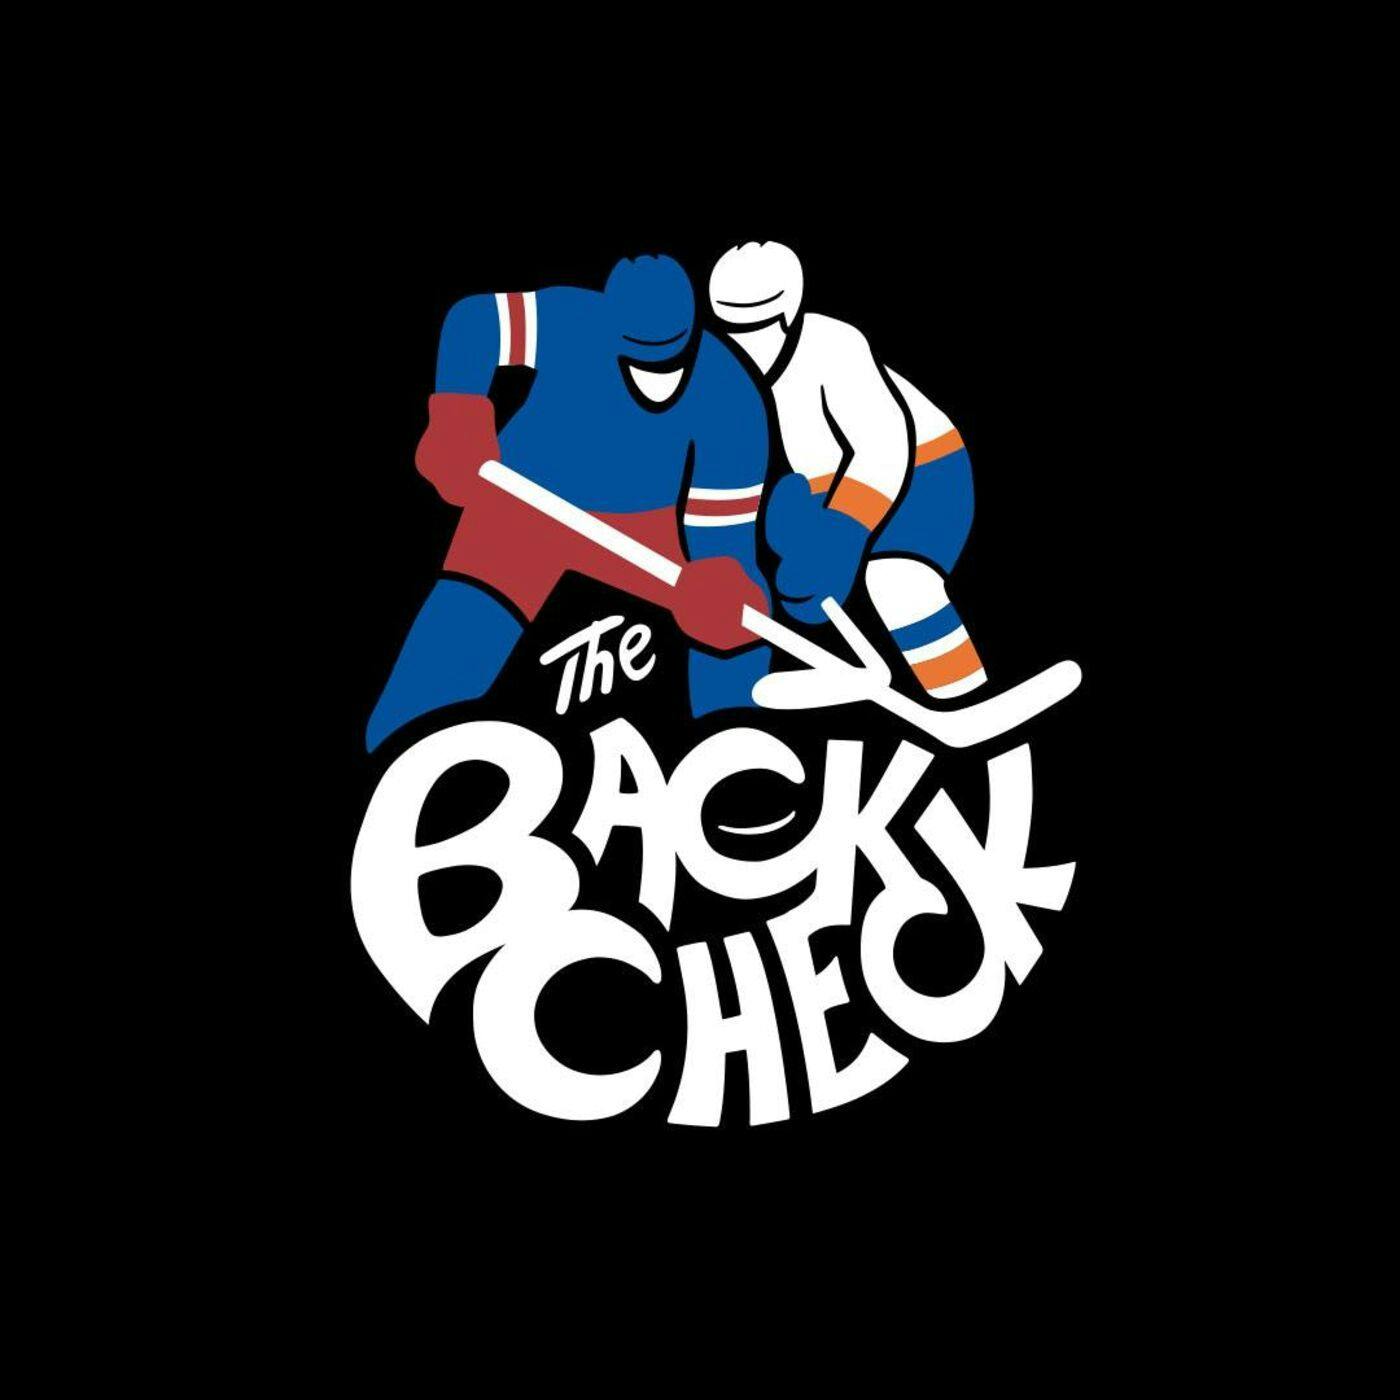 The Backckeck Season 2 Ep 7: Lack of Commitment by Isles, Rangers Are a Wagon & More